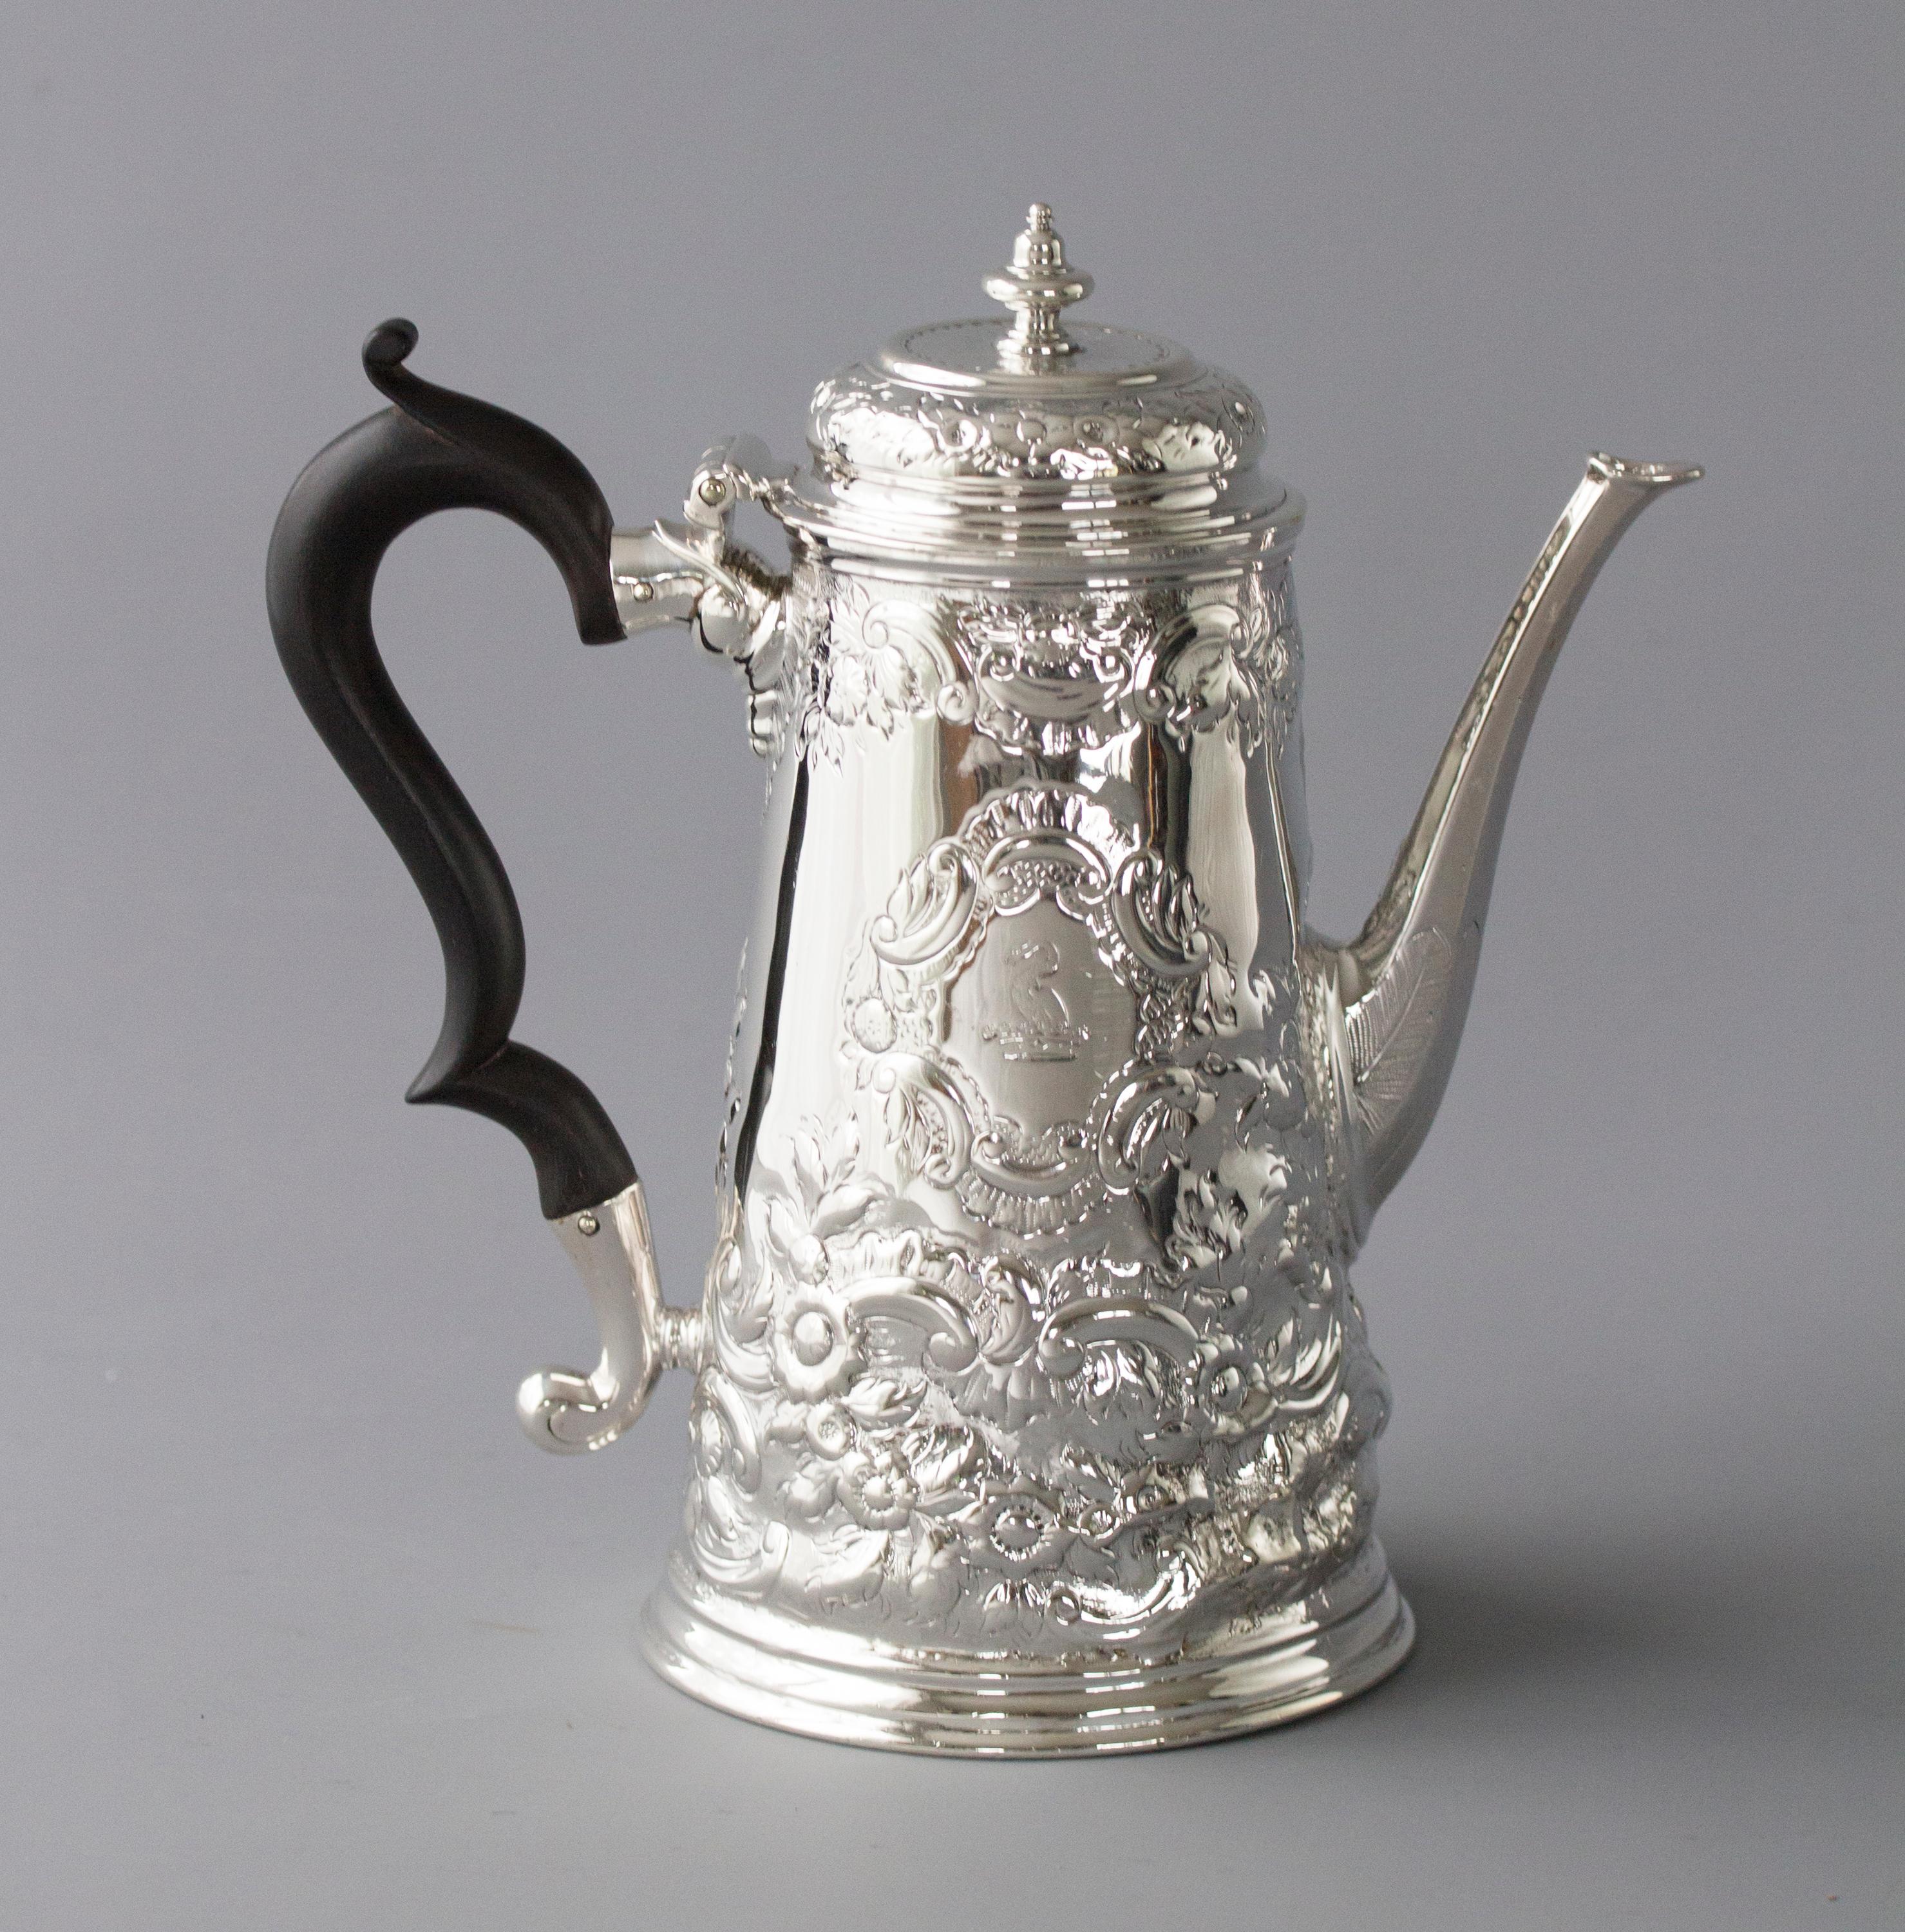 A fine George II silver coffee pot of tapering form embossed all over with floral and foliate motifs, each side with a cartouche, one with the crest of a bird emerging from a coronet and the other with a monogram. The octagonal faceted spout with